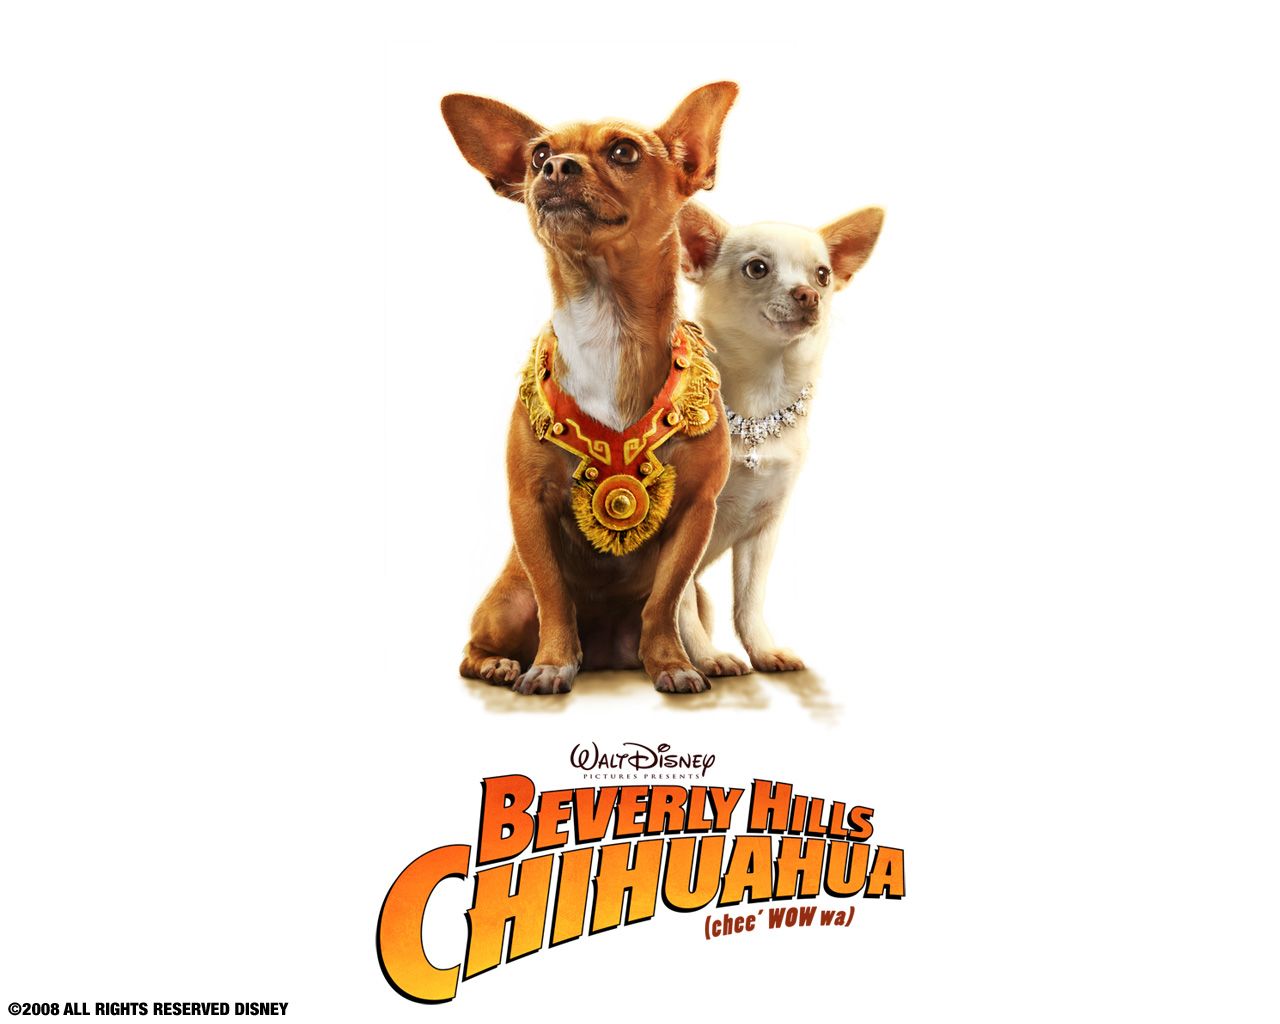 Watch Streaming HD Beverly Hills Chihuahua, starring Drew Barrymore, George Lopez, Piper Perabo, Manolo Cardona. Beverly hills chihuahua, Chihuahua, Beverly hills